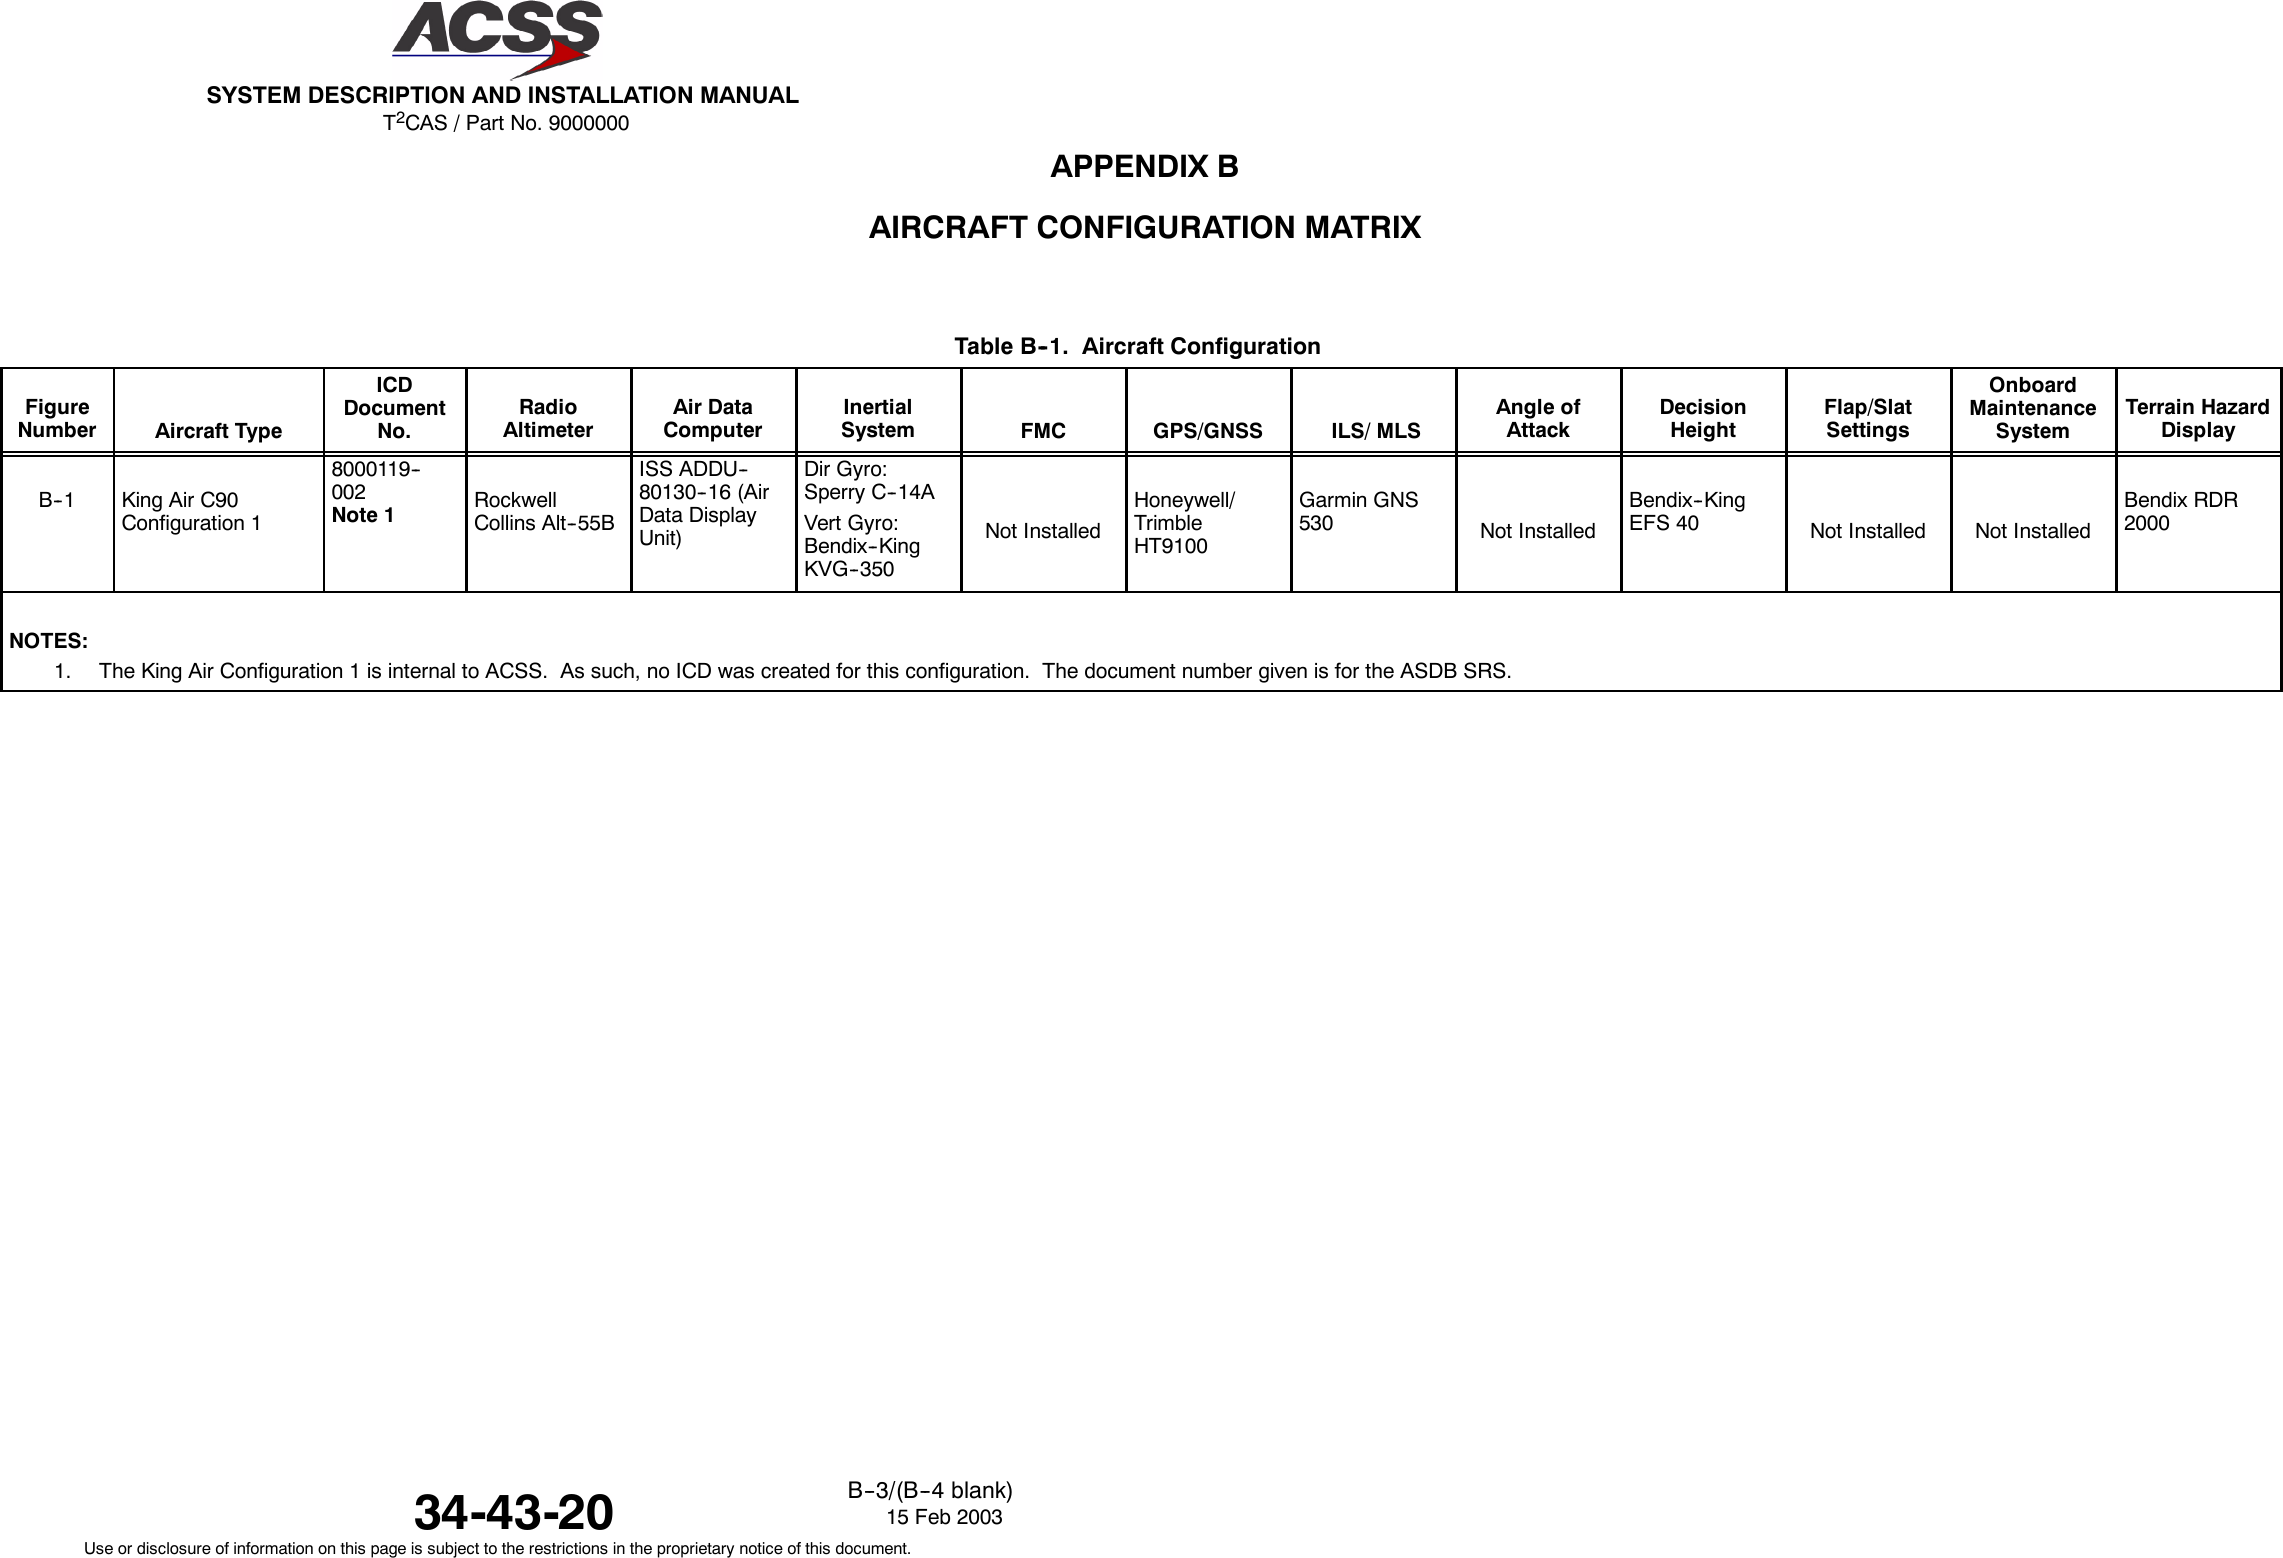 T2CAS / Part No. 9000000SYSTEM DESCRIPTION AND INSTALLATION MANUAL34-43-20 15 Feb 2003Use or disclosure of information on this page is subject to the restrictions in the proprietary notice of this document.B--3/(B--4 blank)APPENDIX BAIRCRAFT CONFIGURATION MATRIXTable B--1. Aircraft ConfigurationFigureNumber Aircraft TypeICDDocumentNo.RadioAltimeterAir DataComputerInertialSystem FMC GPS/GNSS ILS/ MLSAngle ofAttackDecisionHeightFlap/SlatSettingsOnboardMaintenanceSystemTerrain HazardDisplayB--1 King Air C90Configuration 18000119--002Note 1 RockwellCollins Alt--55BISS ADDU--80130--16 (AirData DisplayUnit)Dir Gyro:Sperry C--14AVert Gyro:Bendix--KingKVG--350Not InstalledHoneywell/TrimbleHT9100Garmin GNS530 Not InstalledBendix--KingEFS 40 Not Installed Not InstalledBendix RDR2000NOTES:1. The King Air Configuration 1 is internal to ACSS. As such, no ICD was created for this configuration. The document number given is for the ASDB SRS.